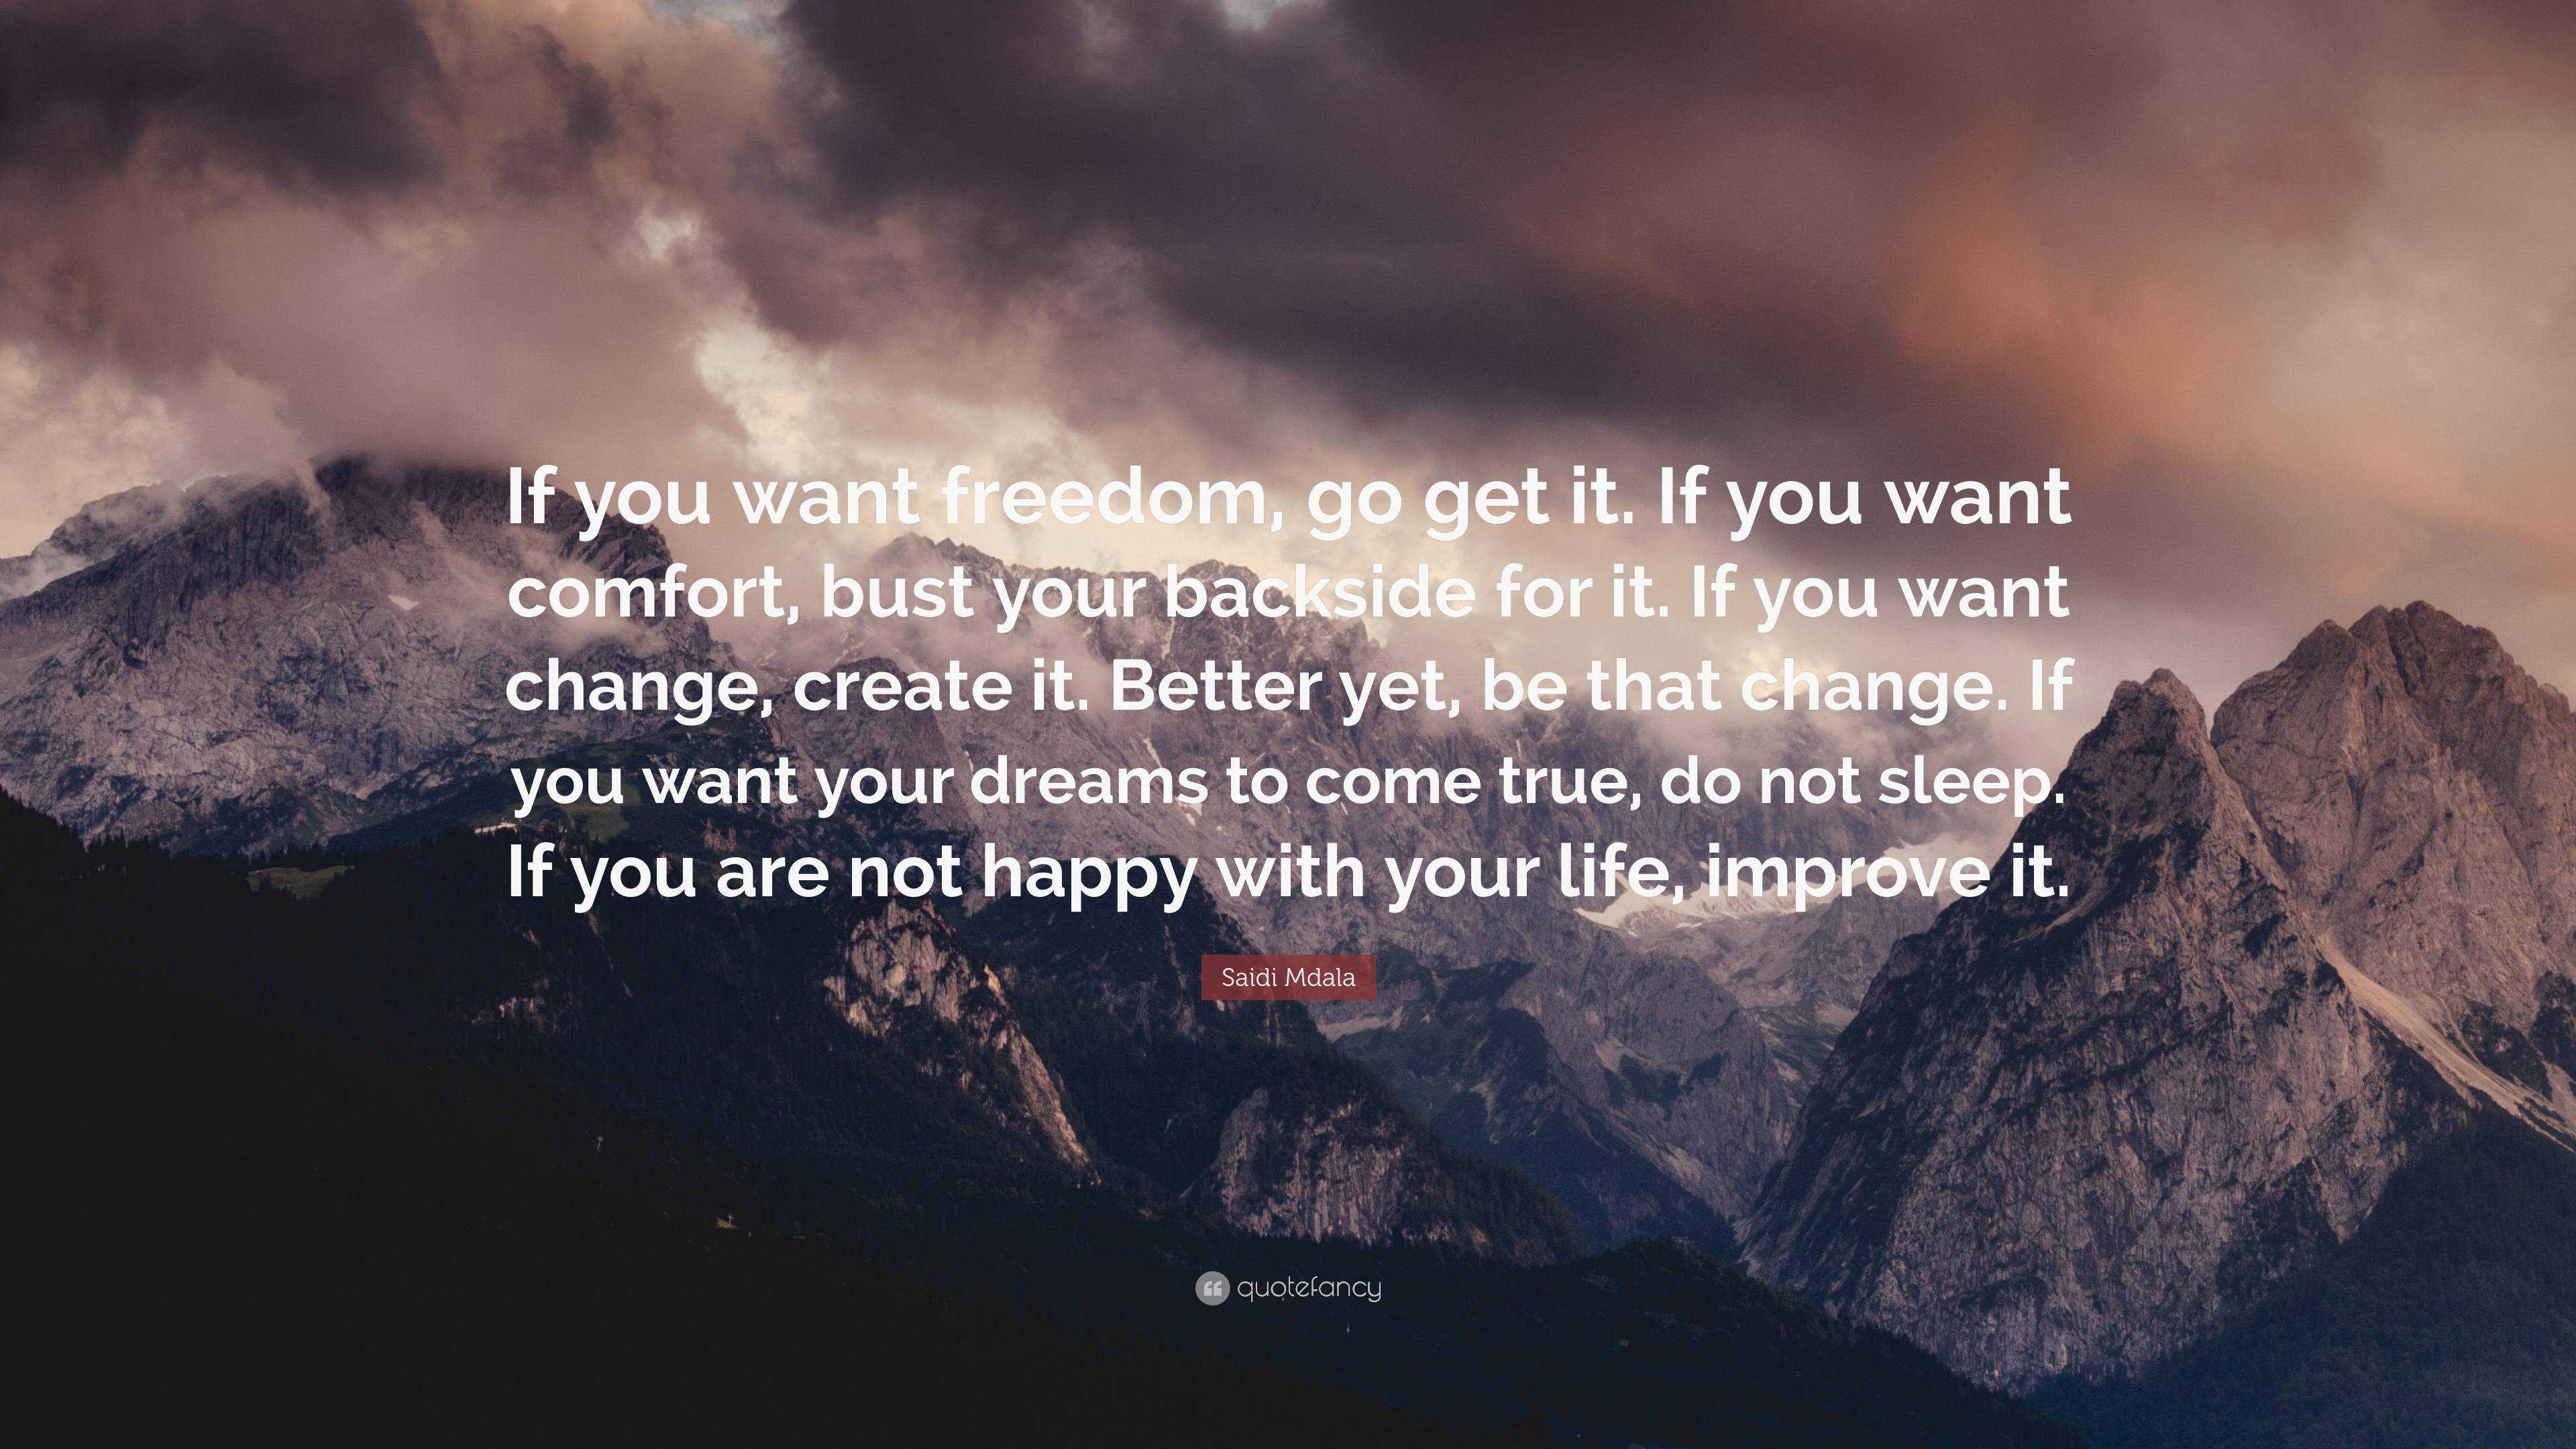 https://quotefancy.com/media/wallpaper/3840x2160/6671517-Saidi-Mdala-Quote-If-you-want-freedom-go-get-it-If-you-want.jpg